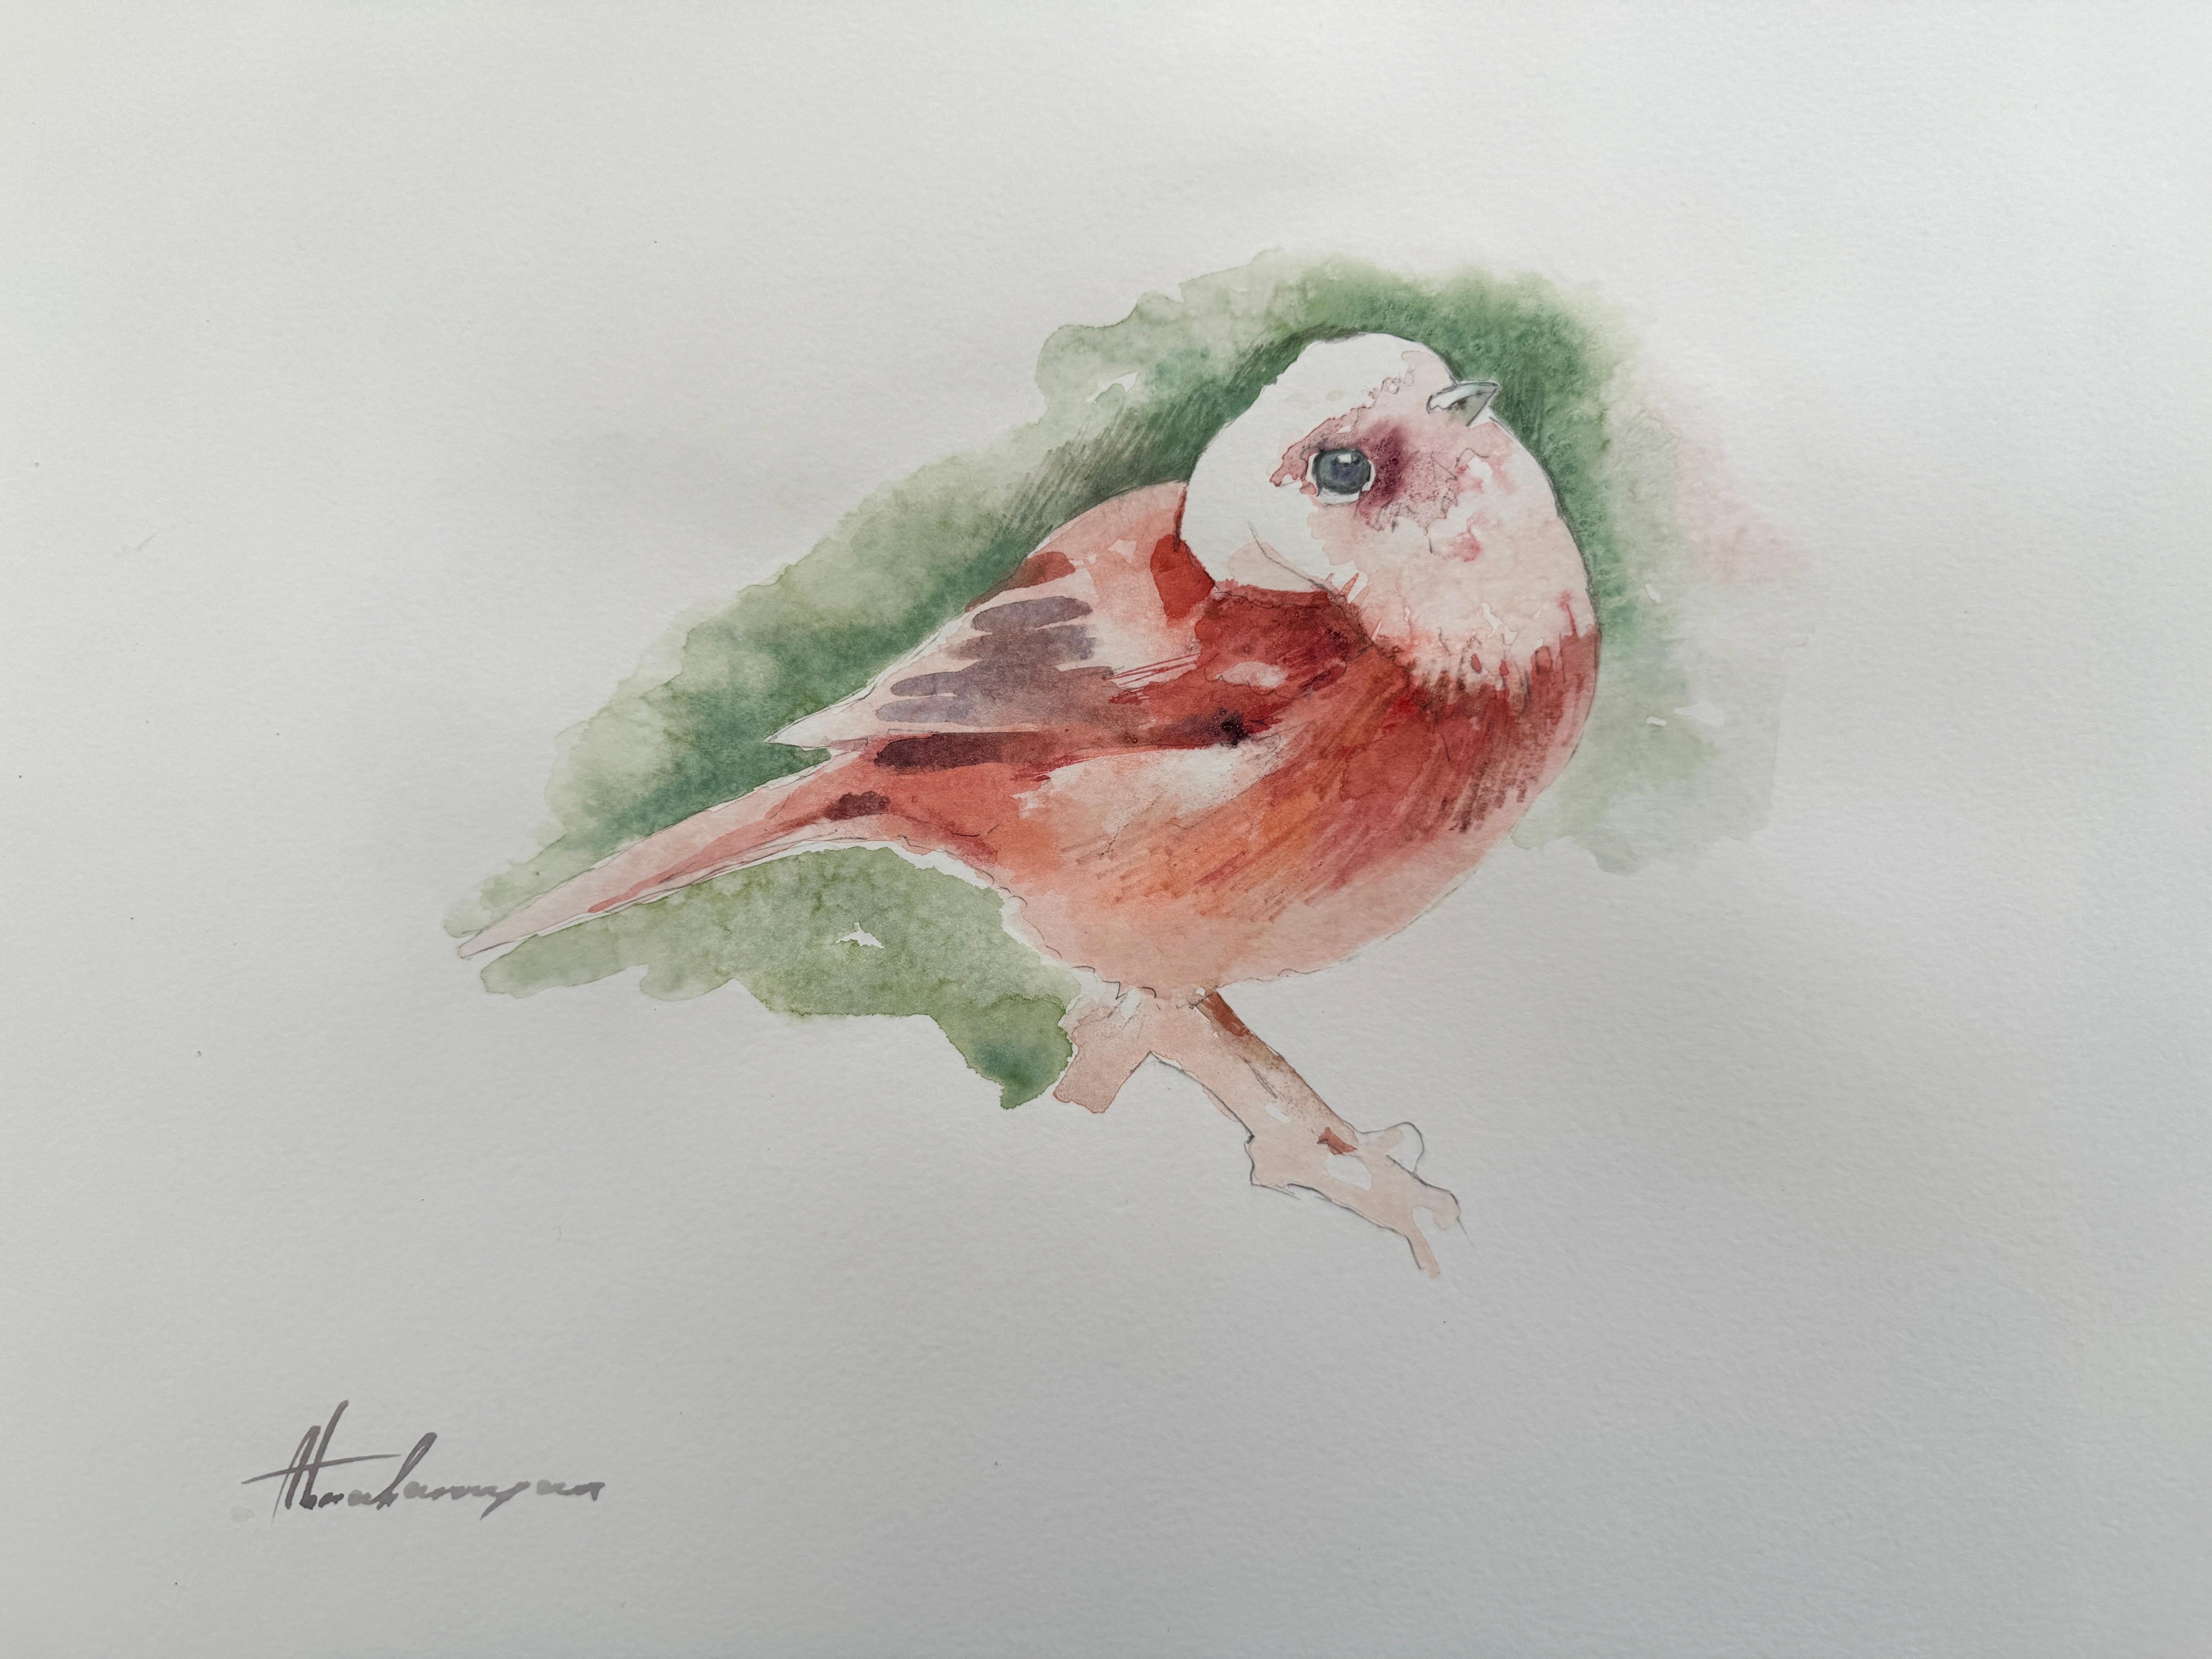 Artyom Abrahamyan Animal Art - Pink Bird, Watercolor on Paper, Handmade Painting, One of a Kind